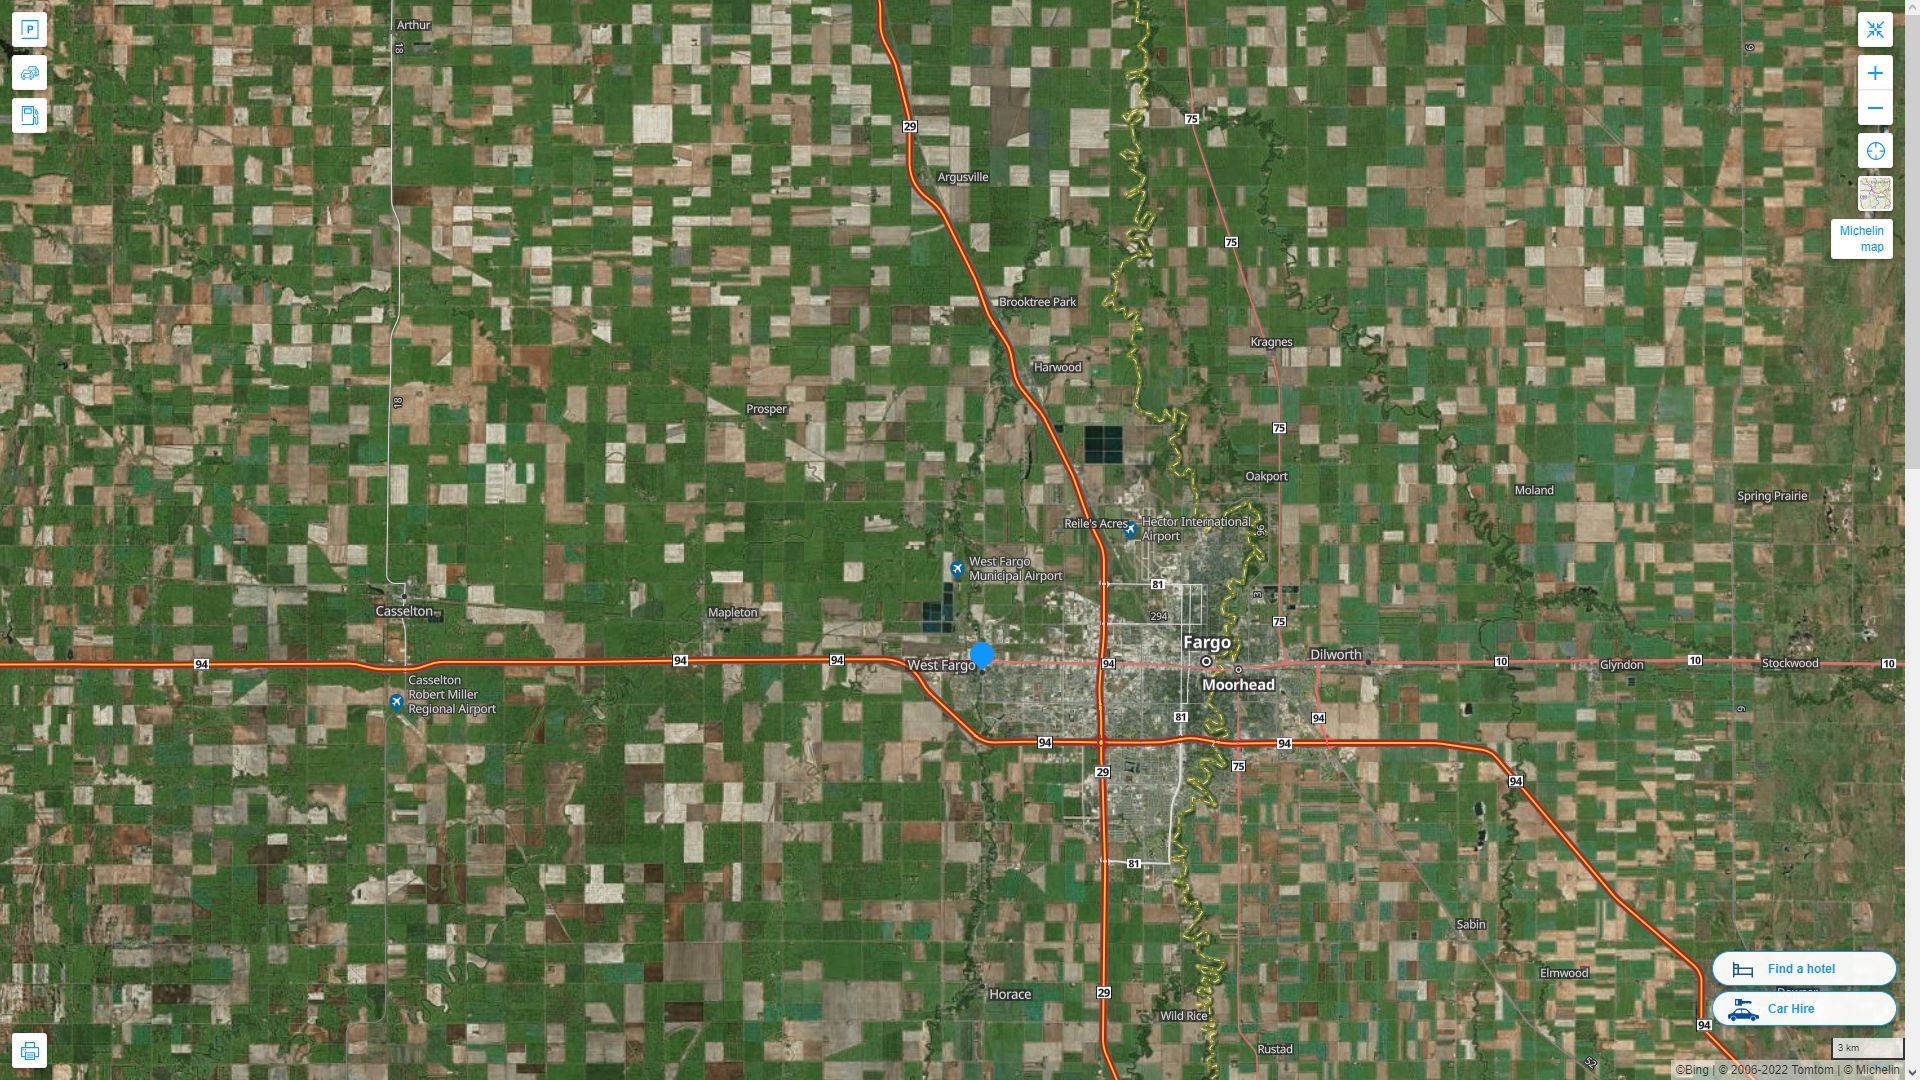 West Fargo North Dakota Highway and Road Map with Satellite View